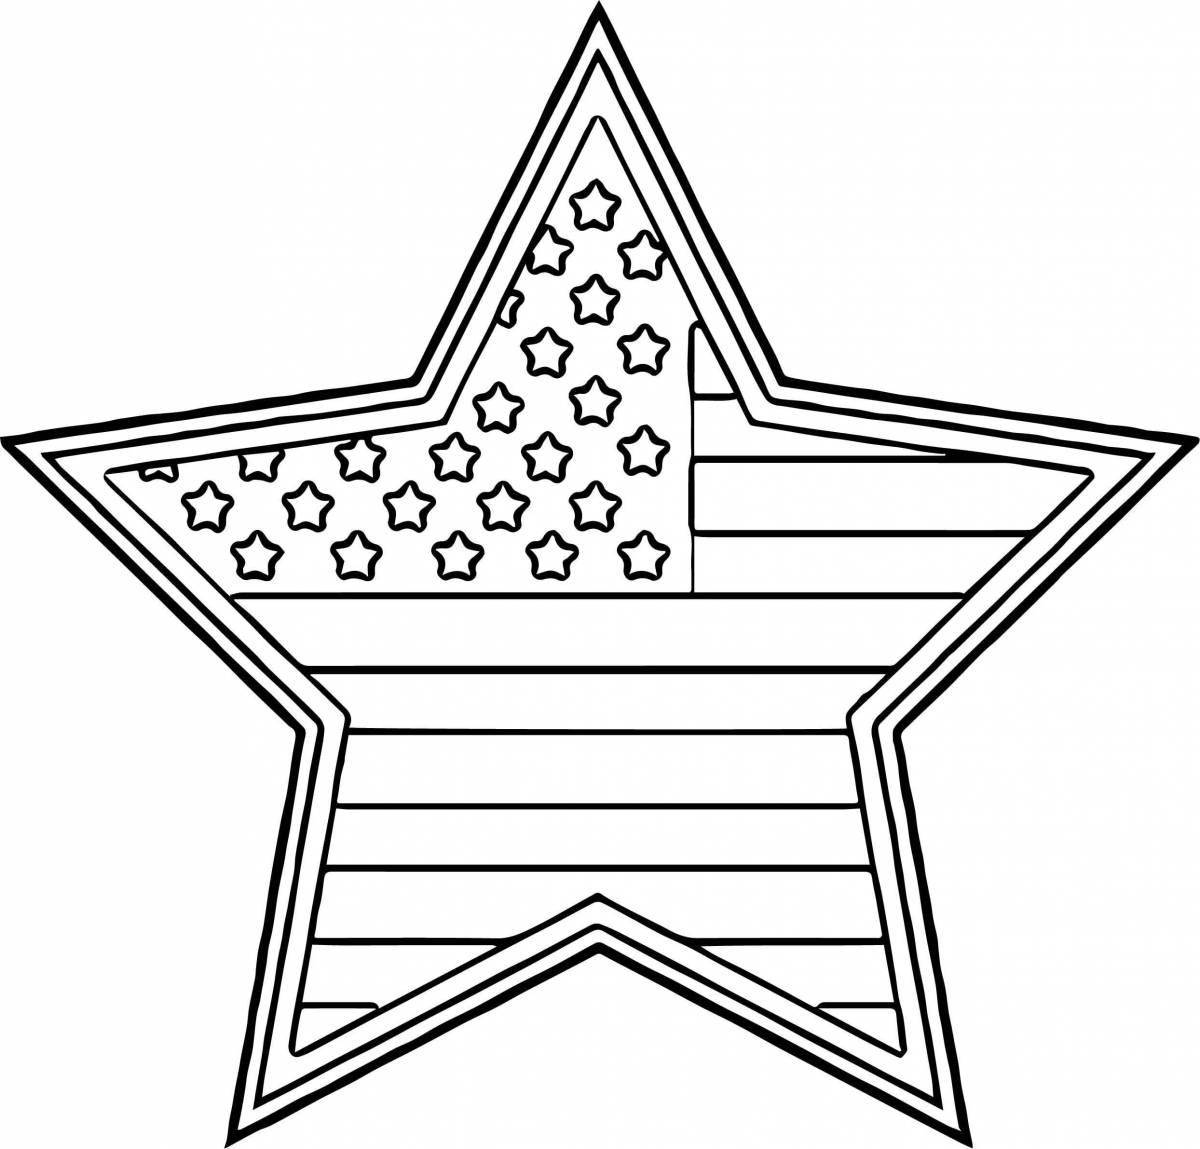 Coloring book glowing star ussr